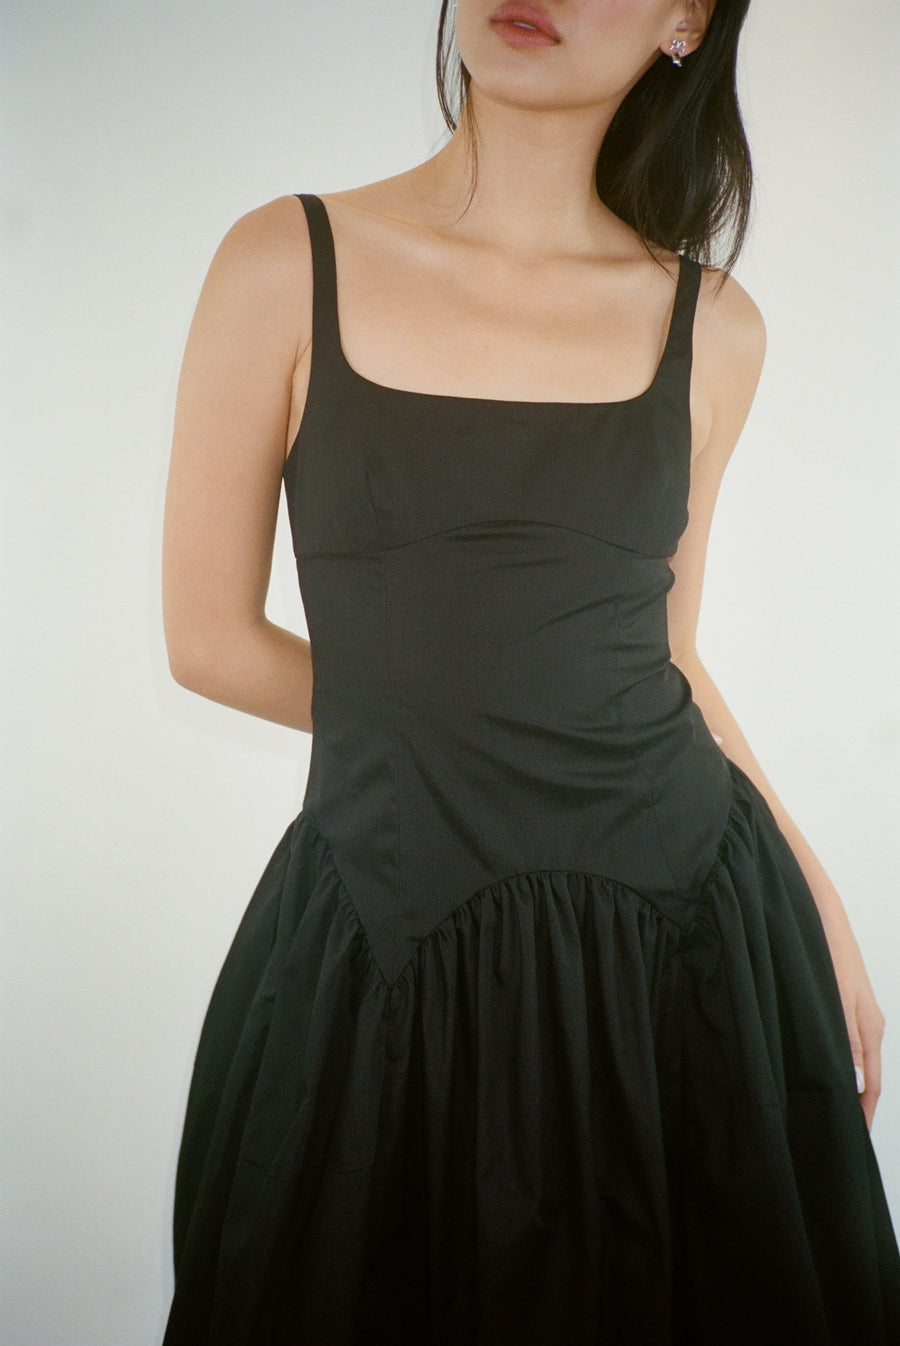 Sleeveless midi length dress in black with ties at back on model